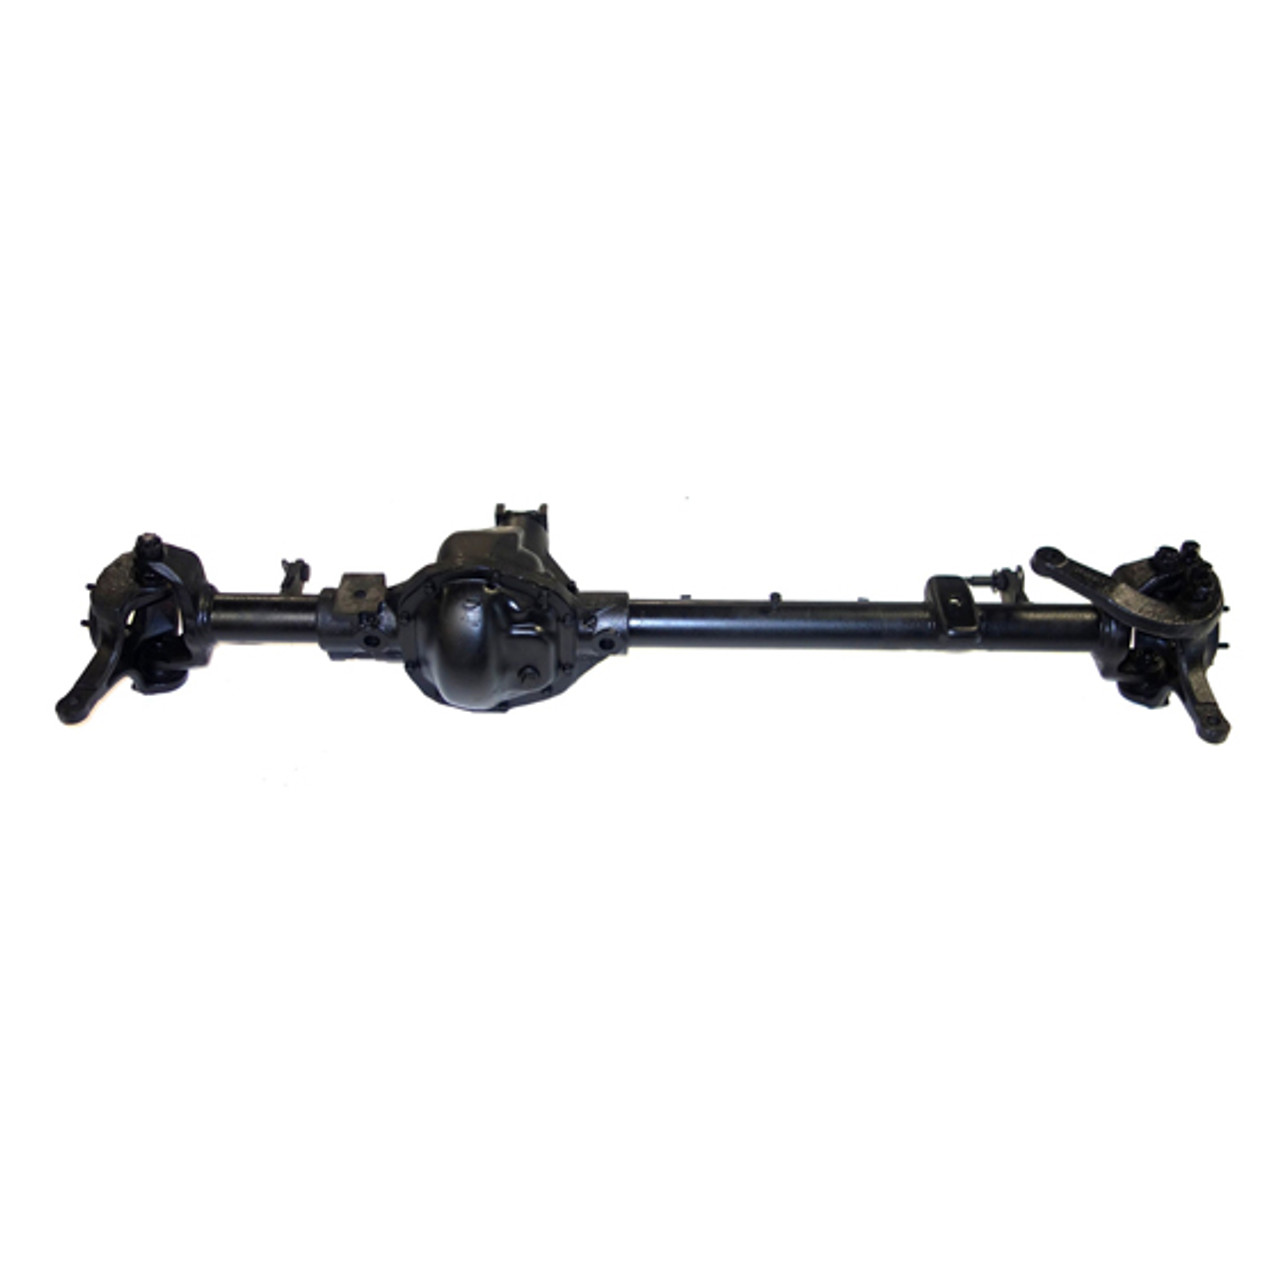 Reman Complete Axle Assembly for Dana 44 1998 Dodge Ram 1500 3.90 Ratio with 4 Wheel ABS